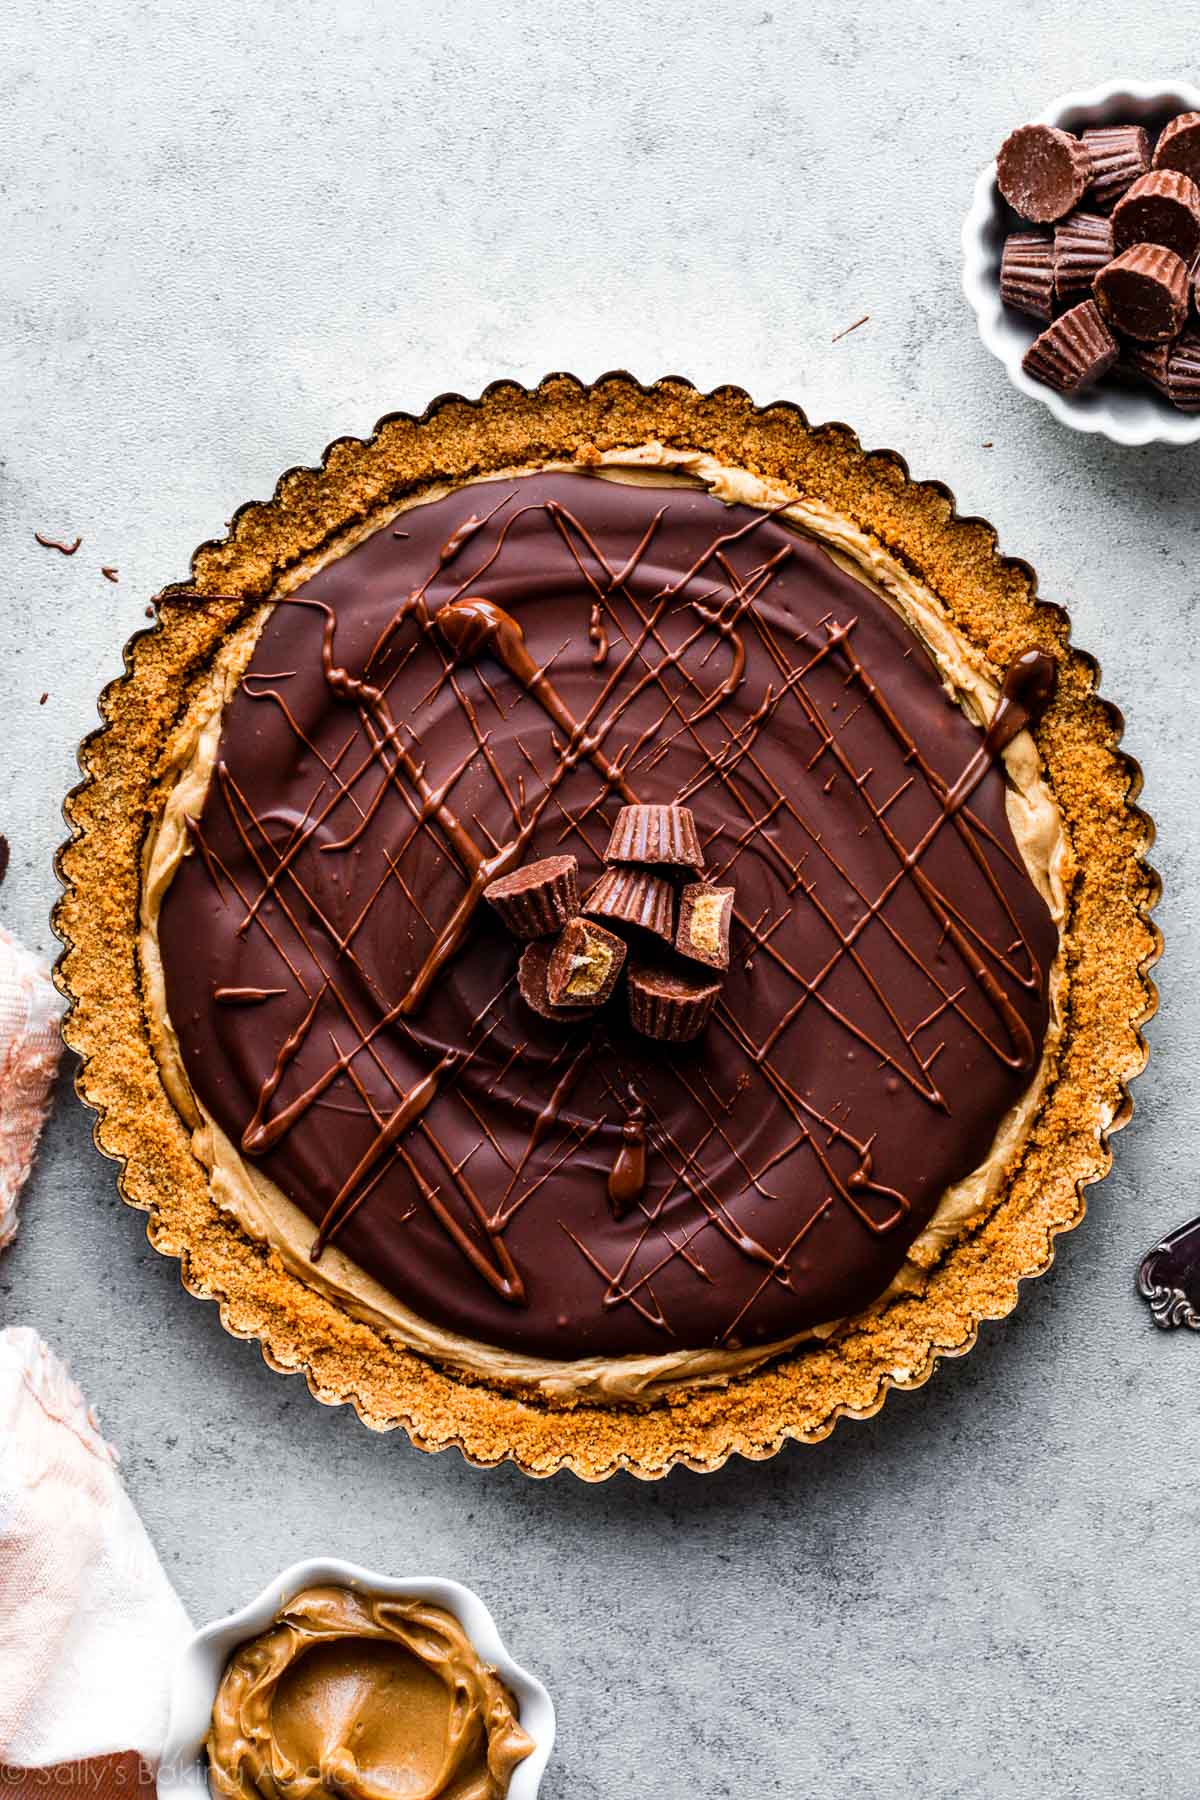 peanut butter tart with chocolate topping